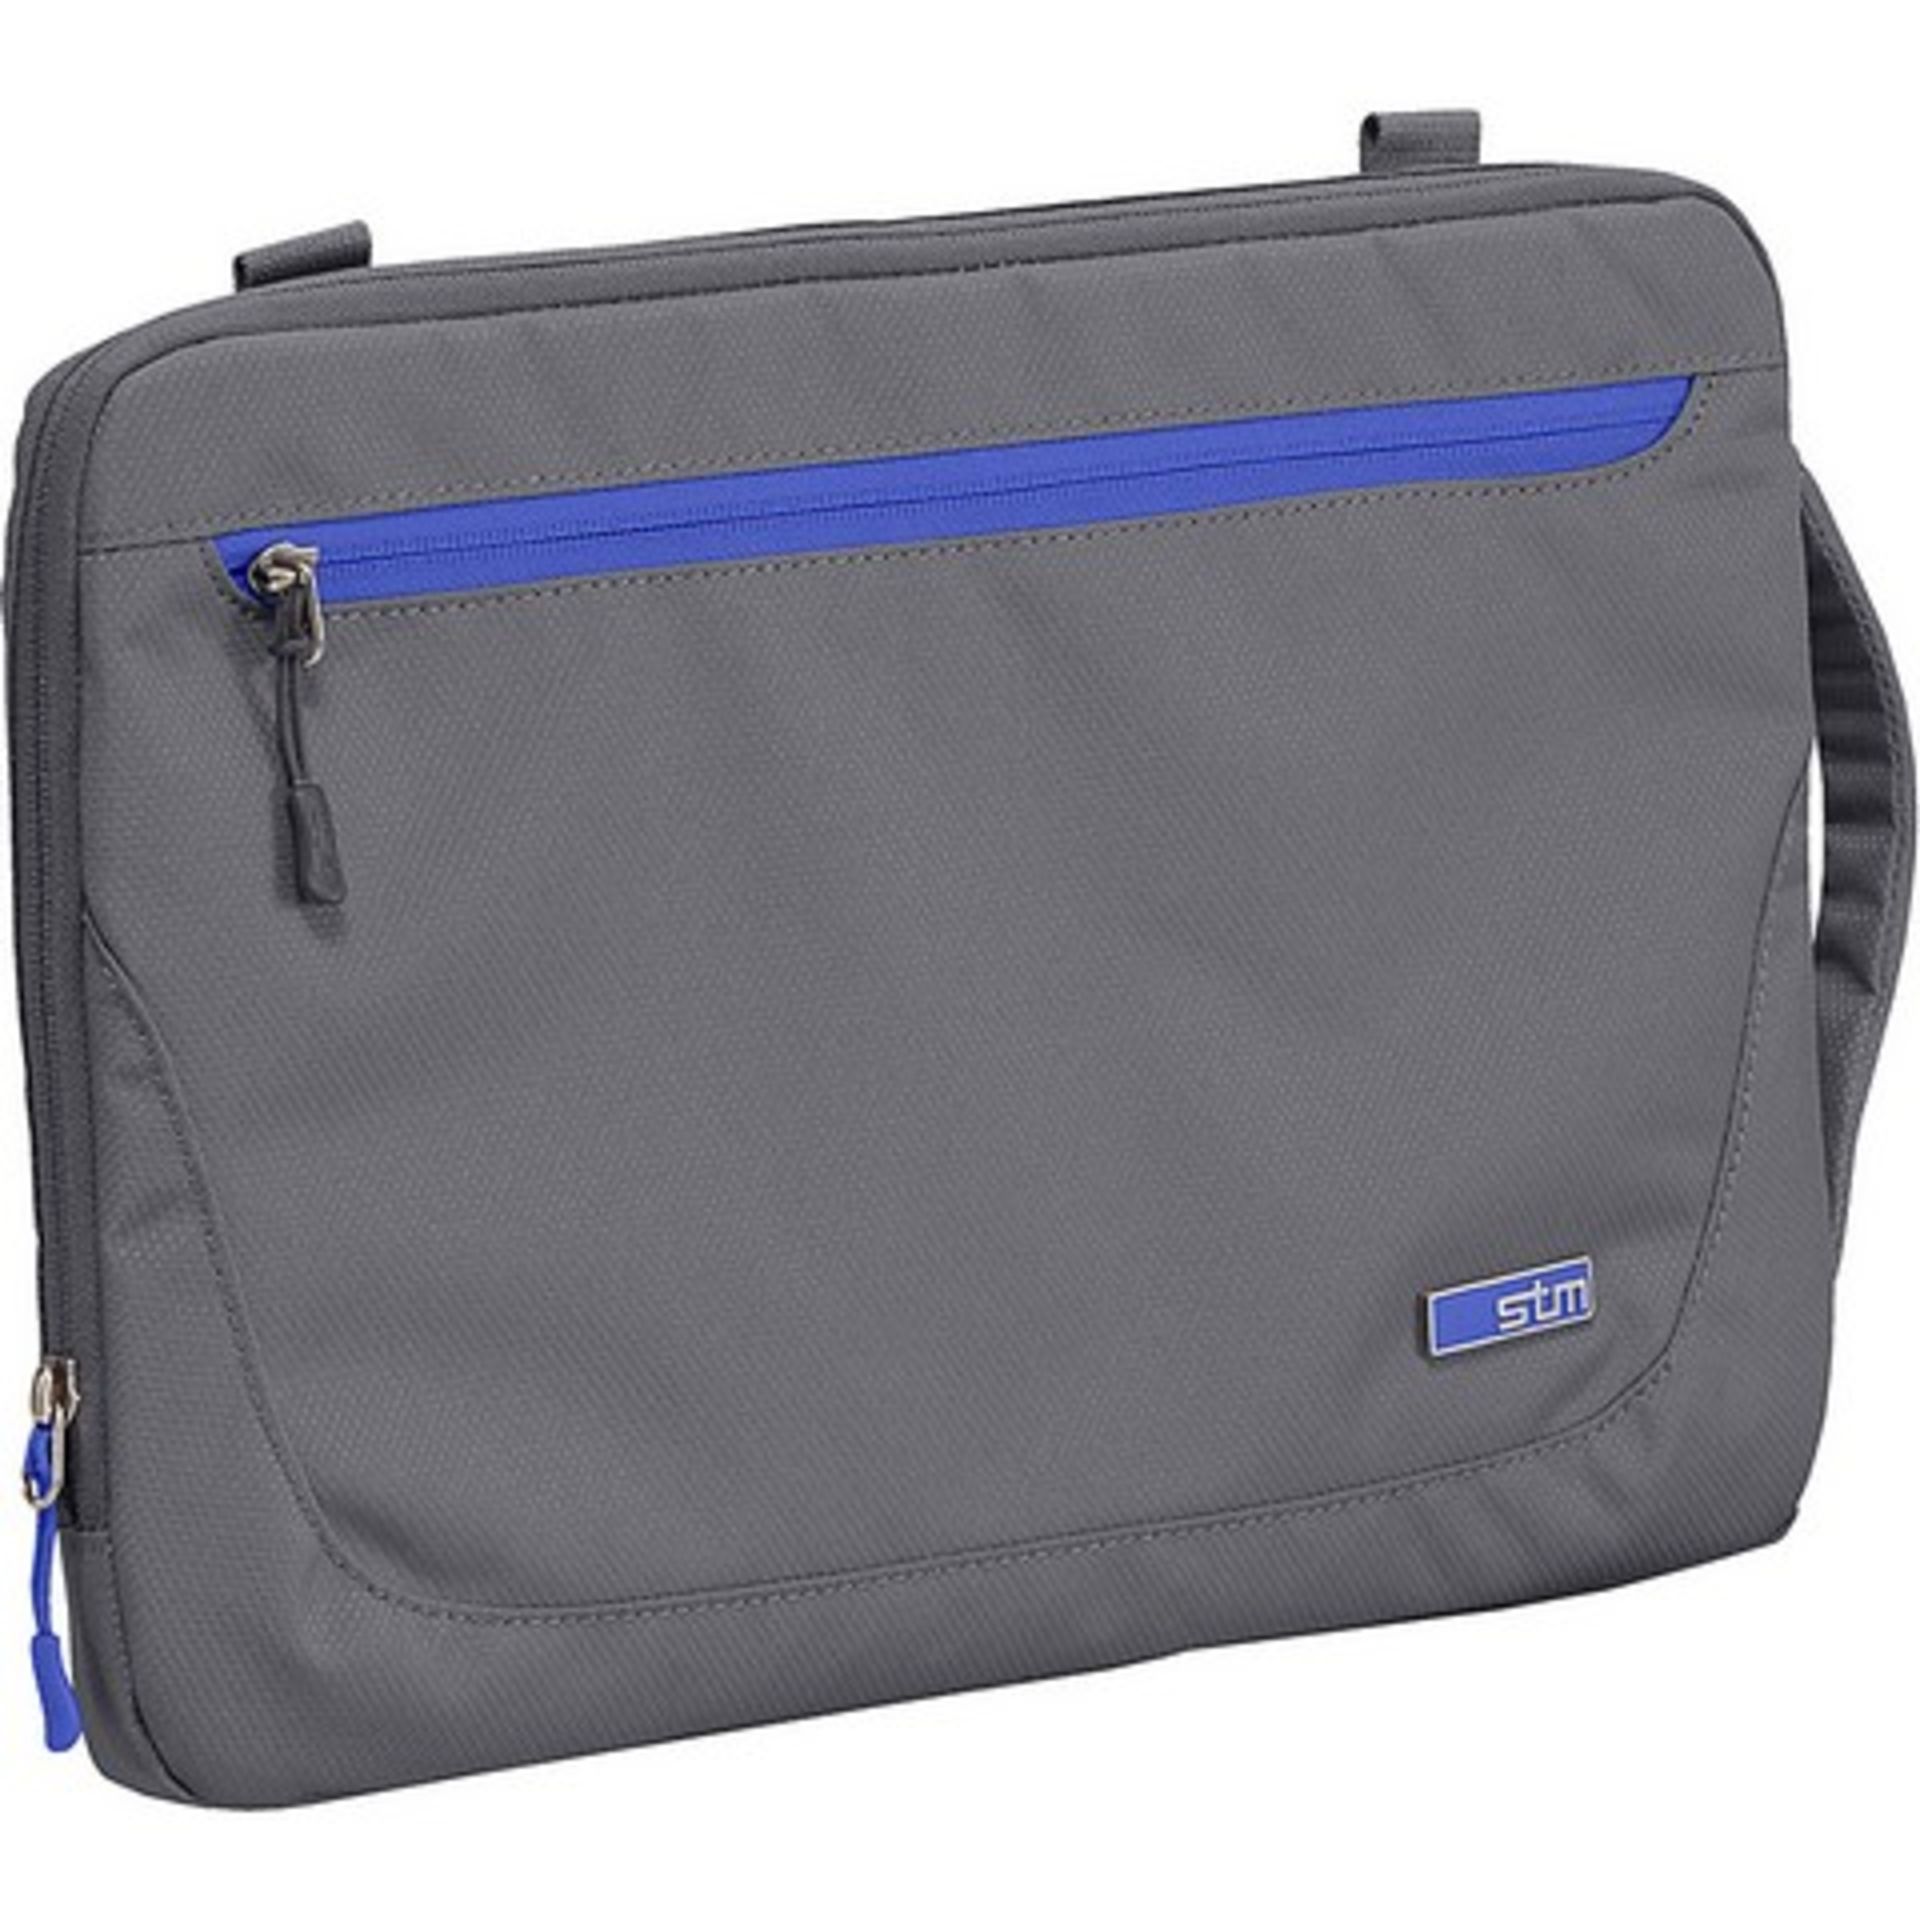 V Brand New STM Blazer Padded Sleeve Bag For Laptops And Tablets 11" Charcoal With Removable